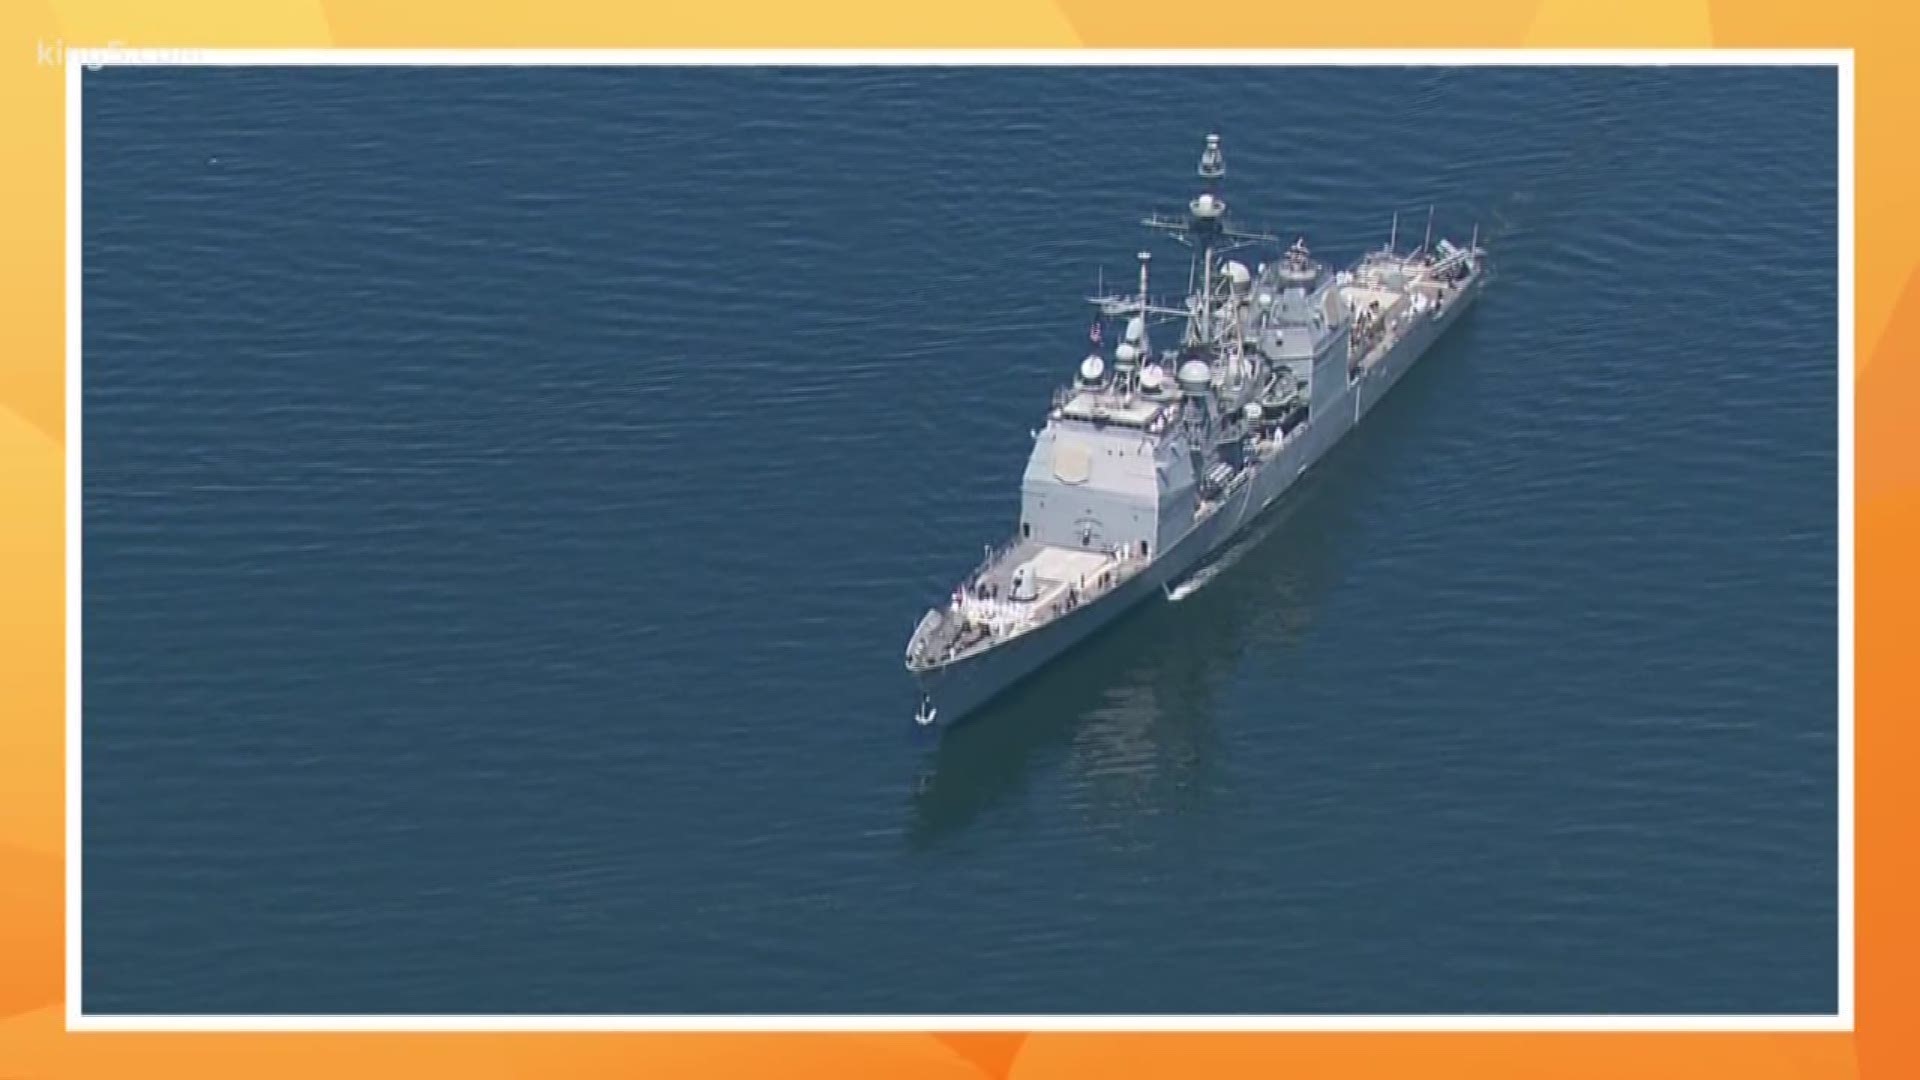 Seafair Fleet Week is here, with a packed weekend of events around town. See a preview of Seafair's 70th anniversary in Seattle. KING 5's Vanessa Misciagna reports.